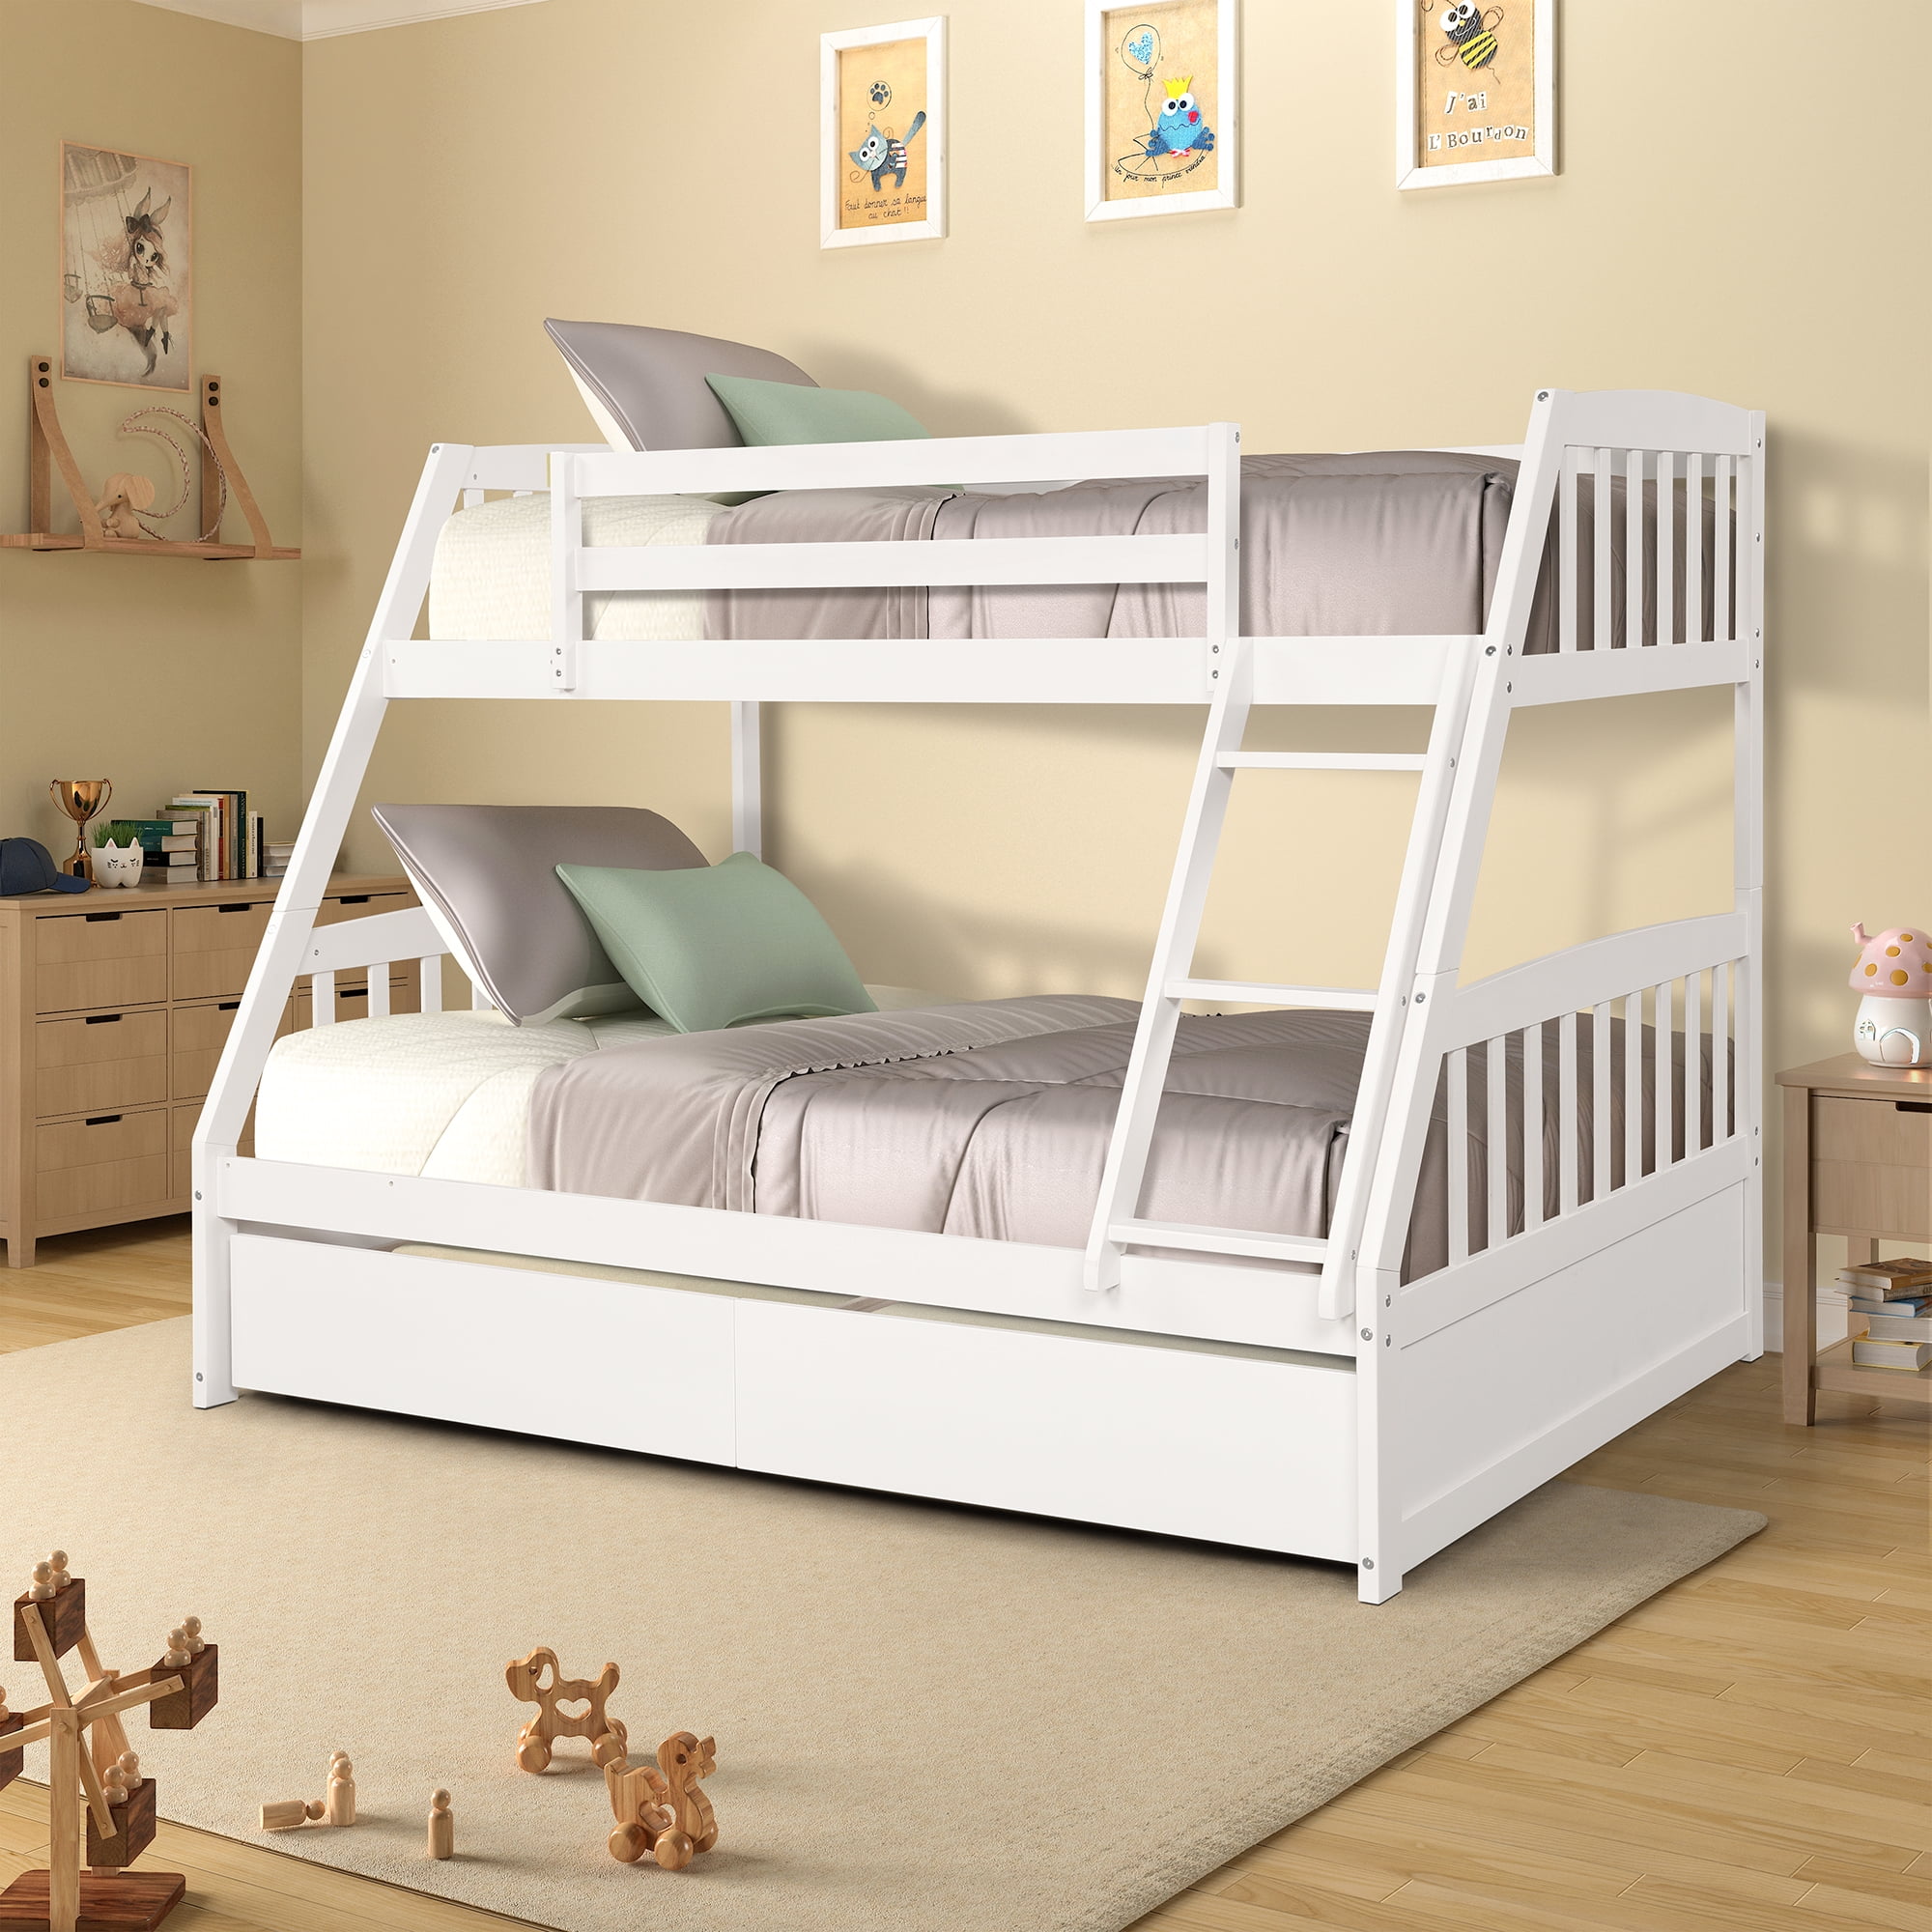 White Kids Wood Bunk Beds Twin over Twin Bed Bedroom Furniture Bunkbeds Bunkbed 